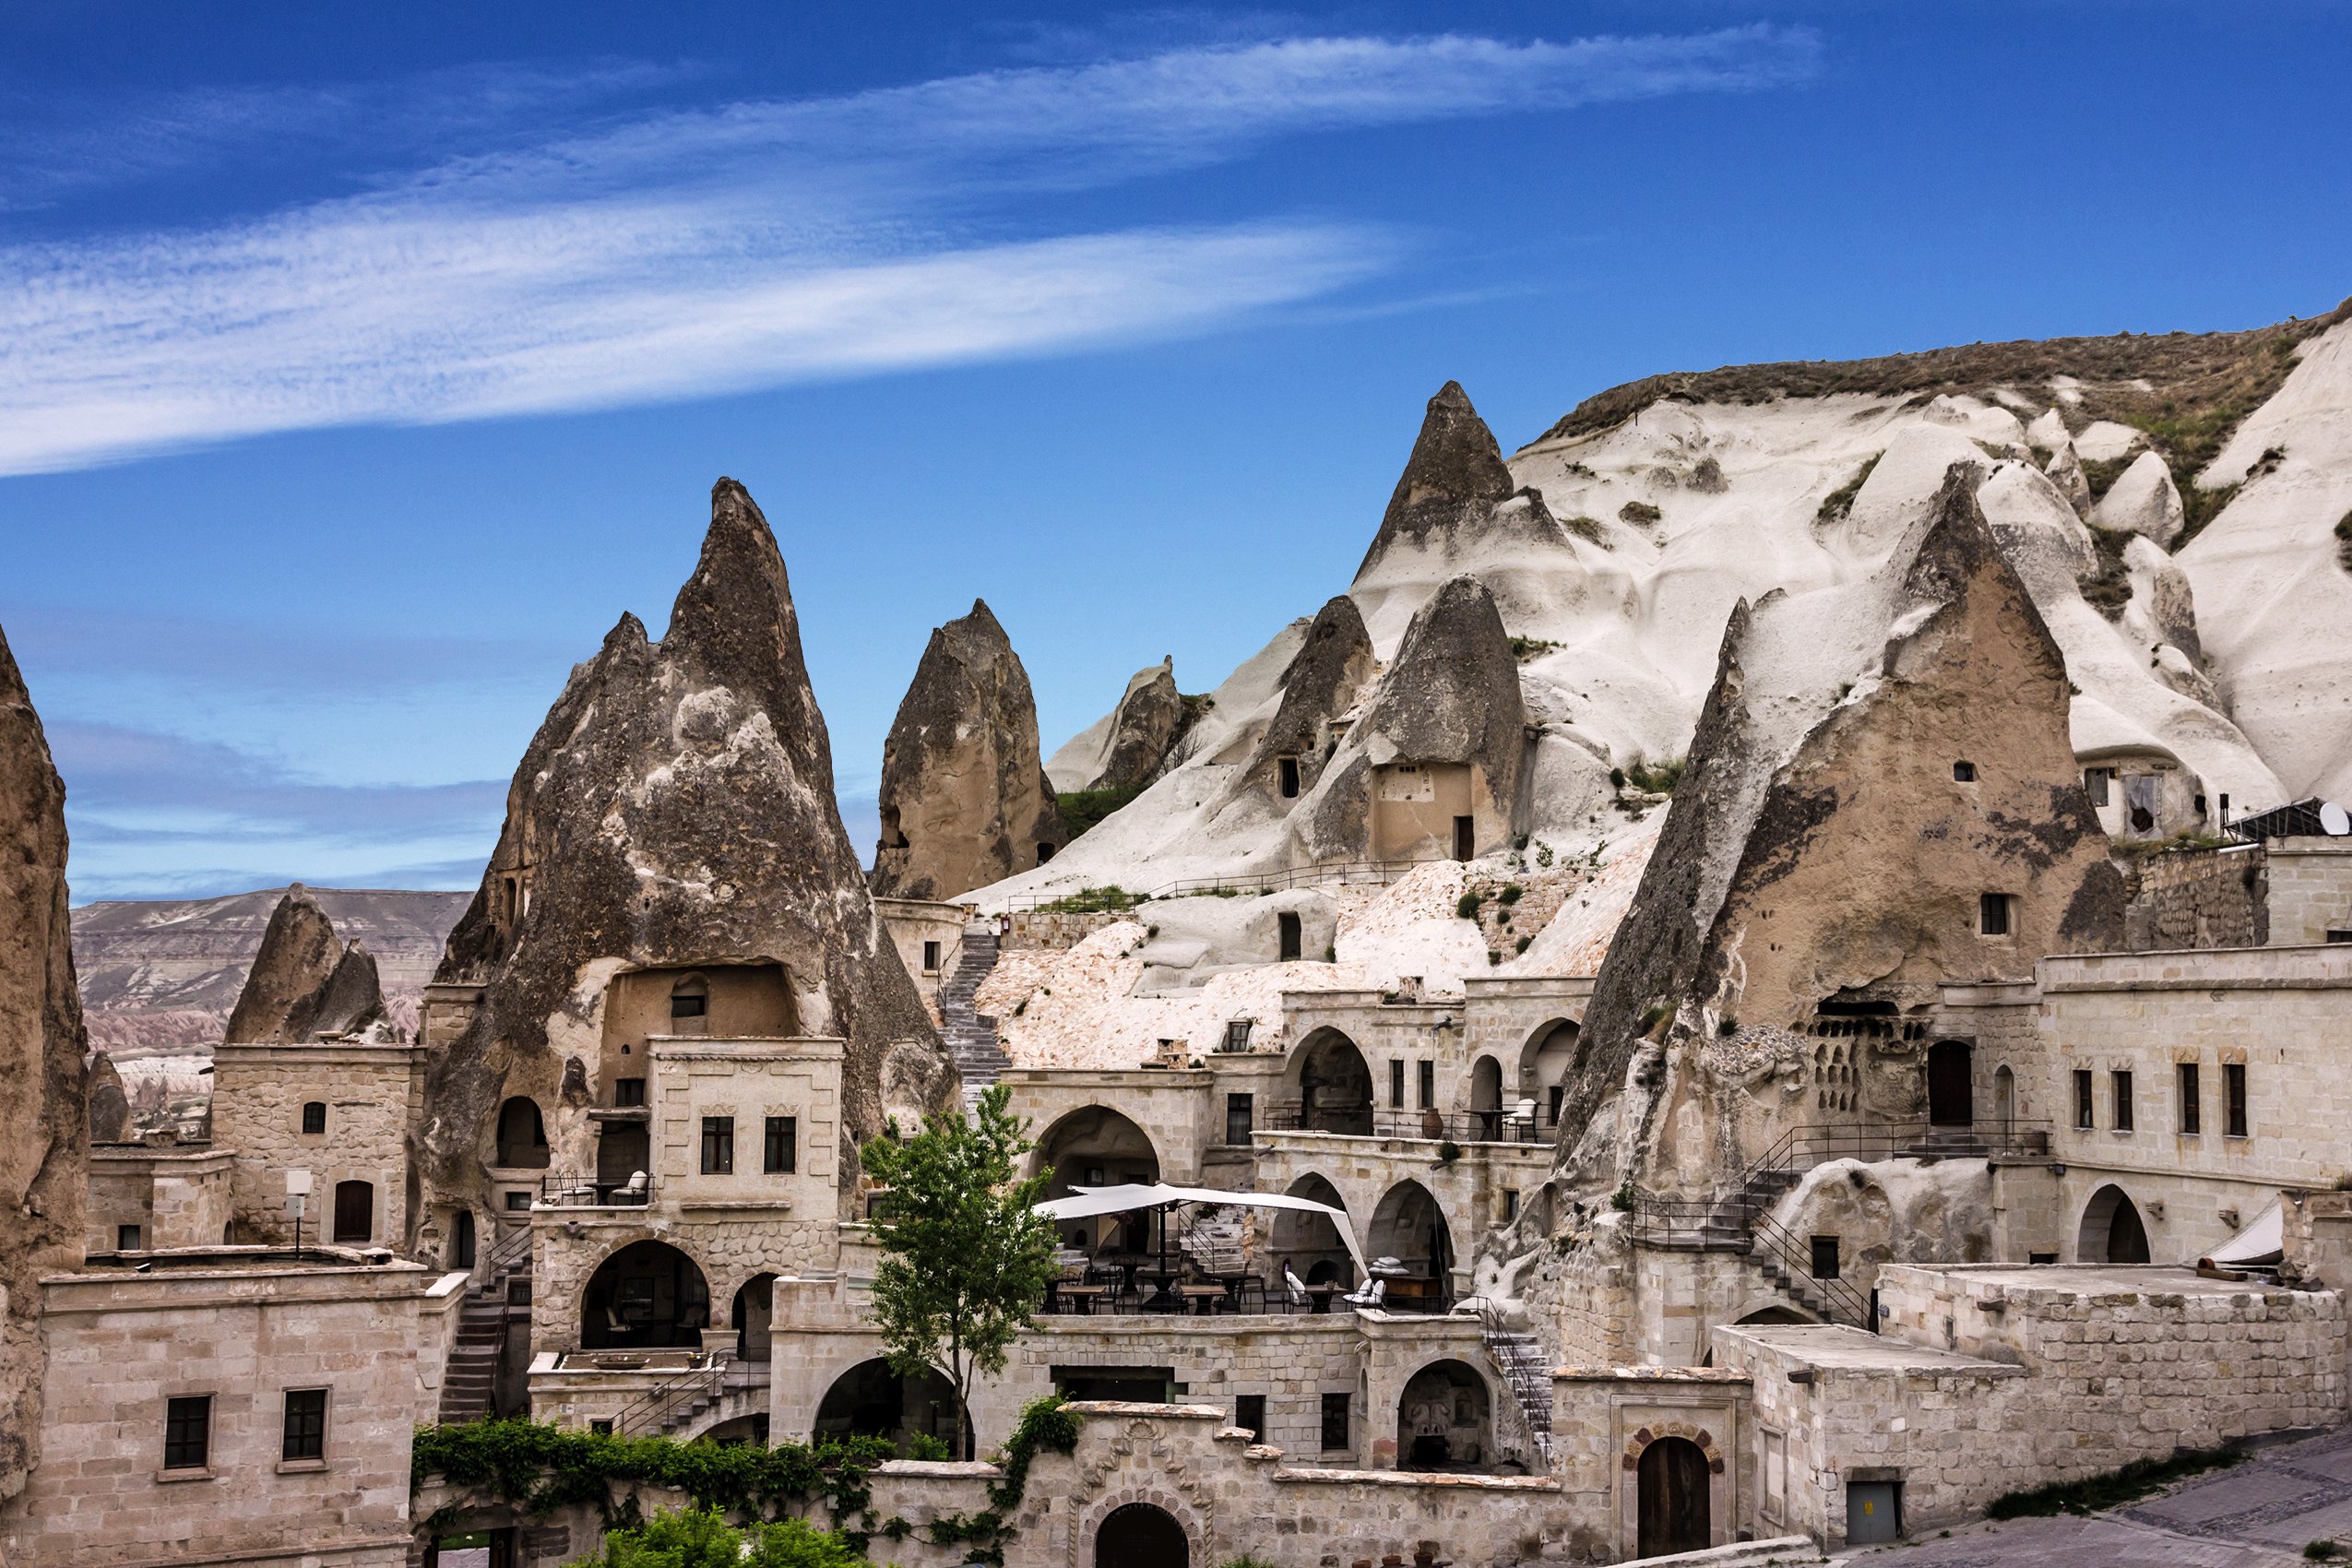 Stroll Through The Goreme Open Air Museum On The Cappadocia 3 Day Tour From Antalya